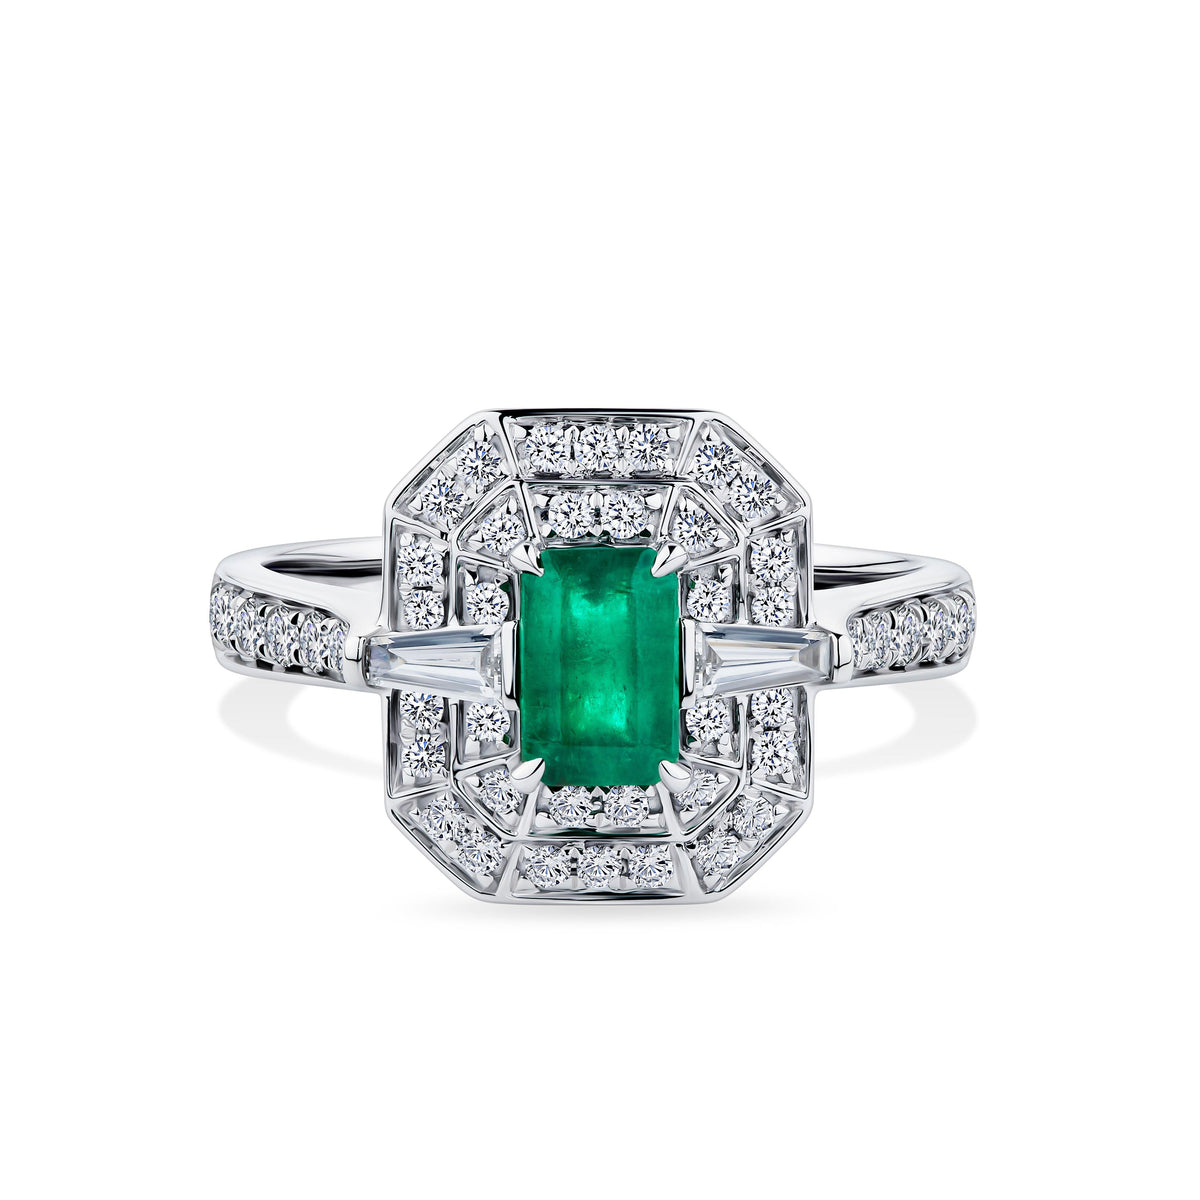 Bluebird™ Emerald & 0.50ct TW Diamond Ring in 9ct White Gold - Wallace Bishop